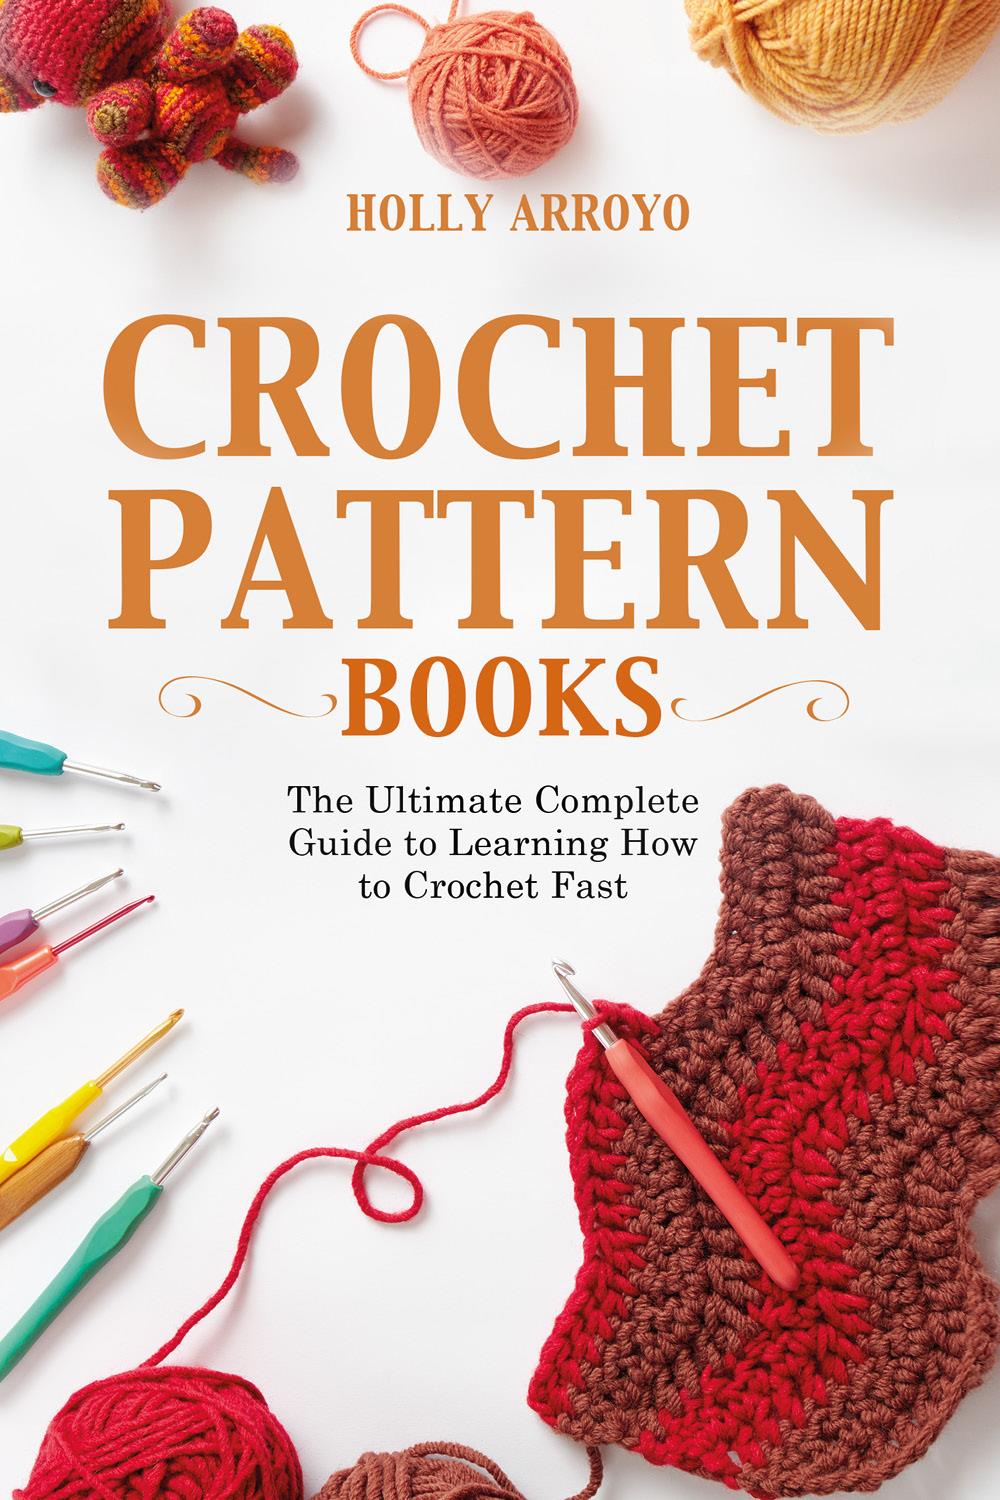 Crochet Pattern Books. The Ultimate Complete Guide to Learning How to Crochet Fast